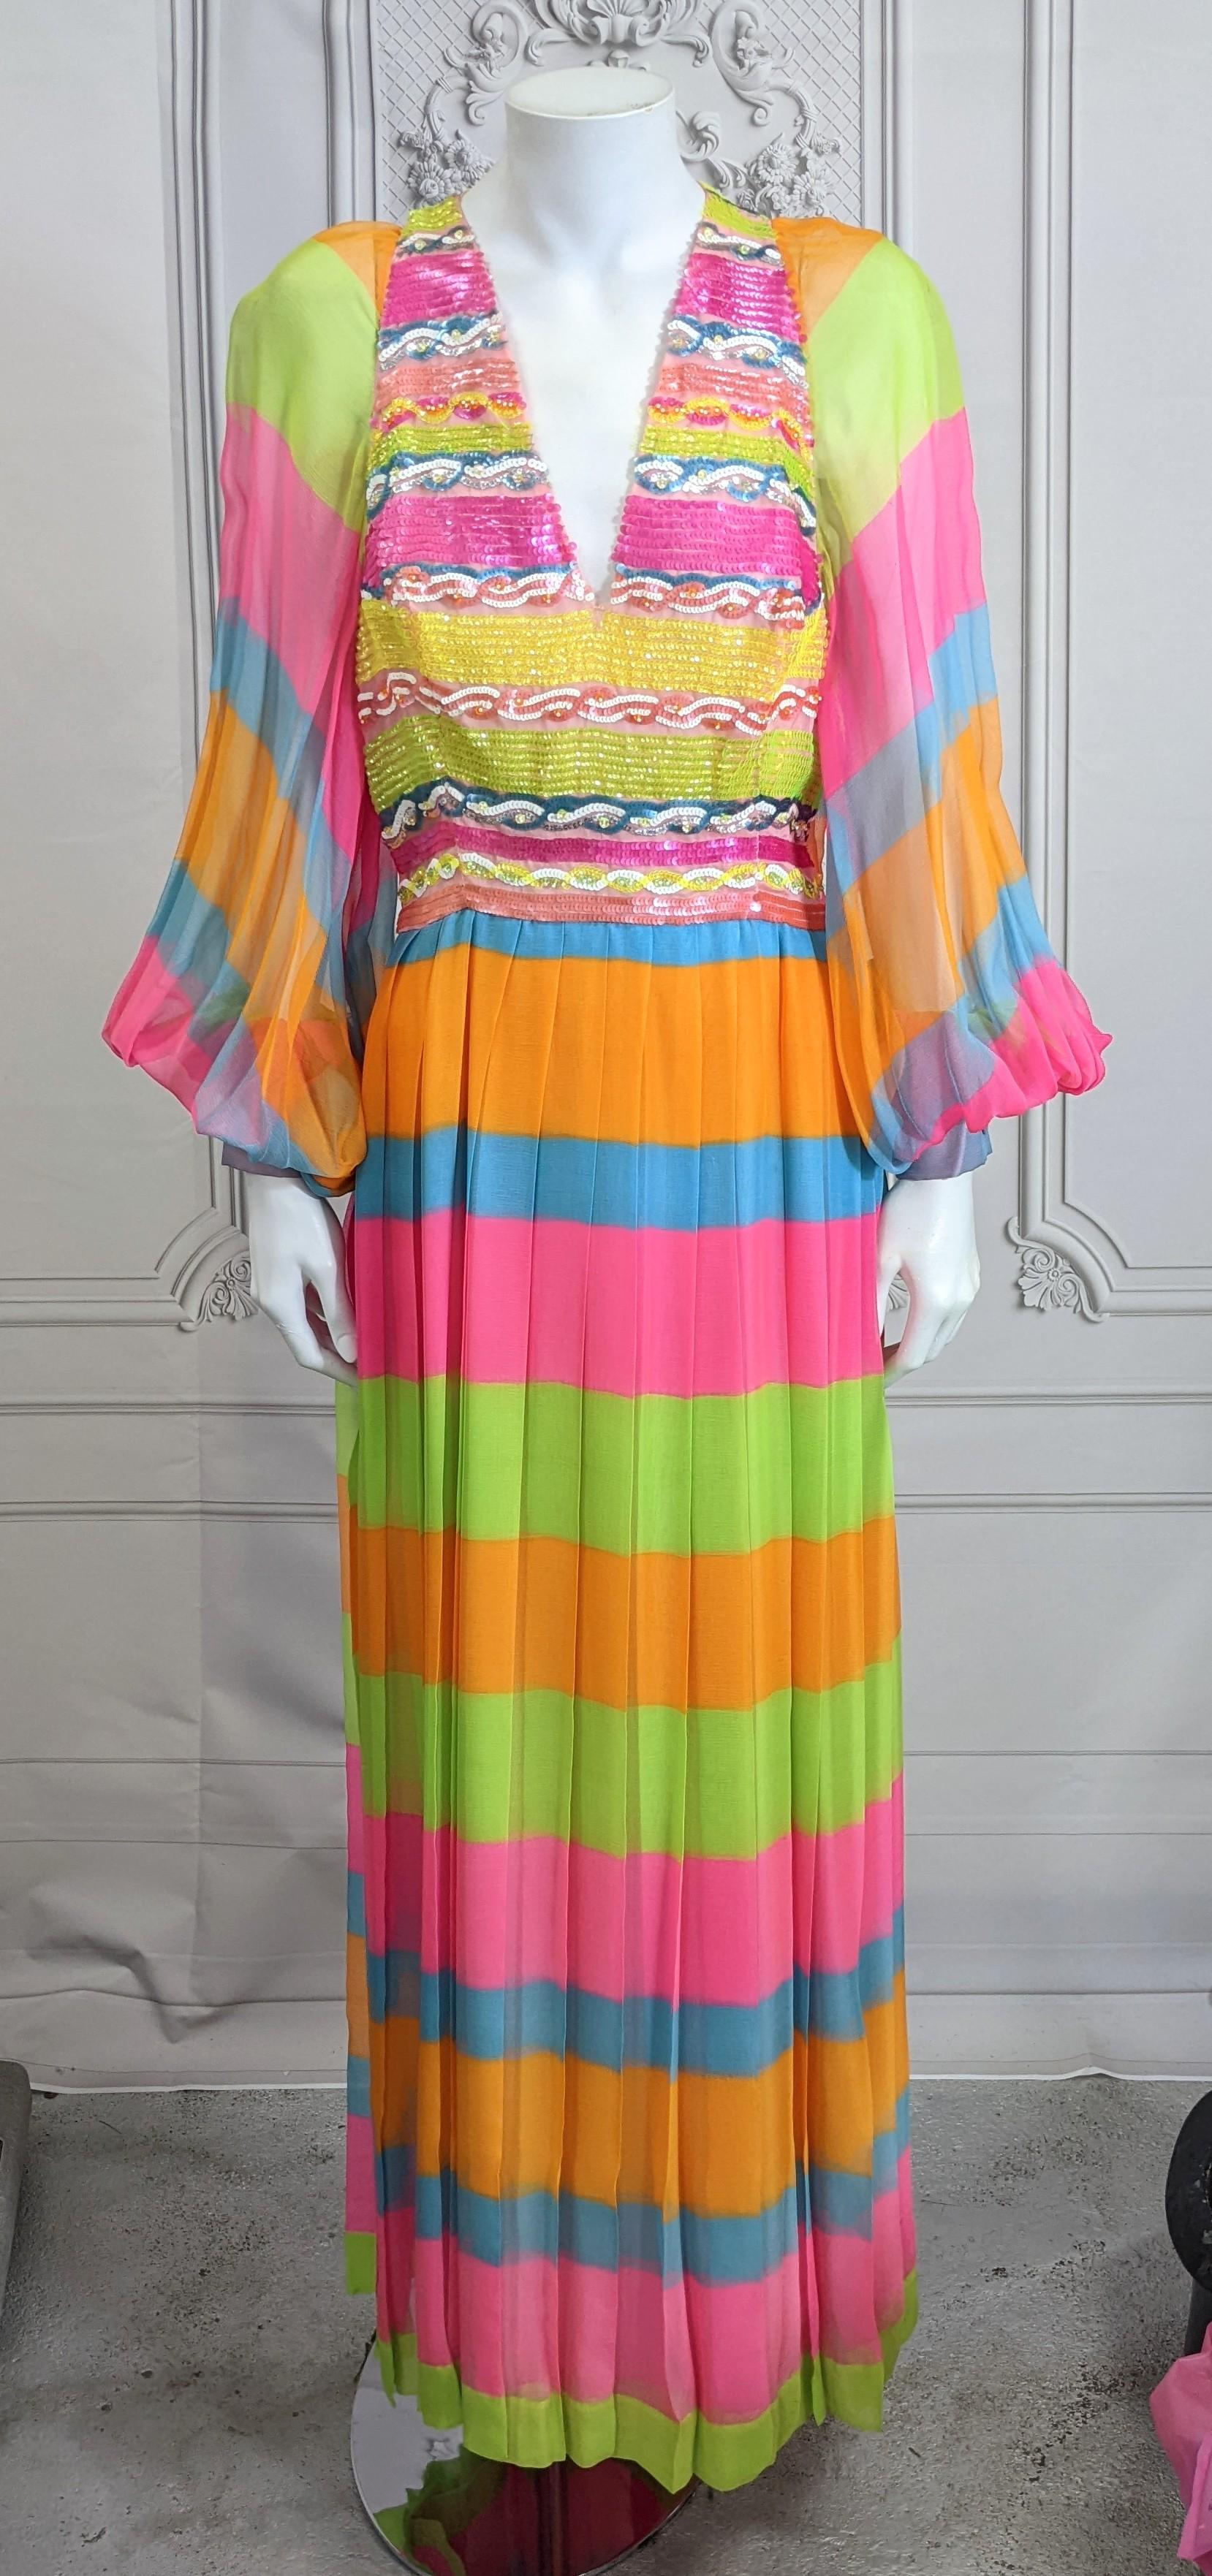 Amazing Technicolor Silk Chiffon and Sequined Gown from the 1970's. Designer label has been removed but quality is beautiful. Vibrant tropical striped silk chiffon with matching tonal sequin bodice and waist band.
Full pleated skirt as well as full